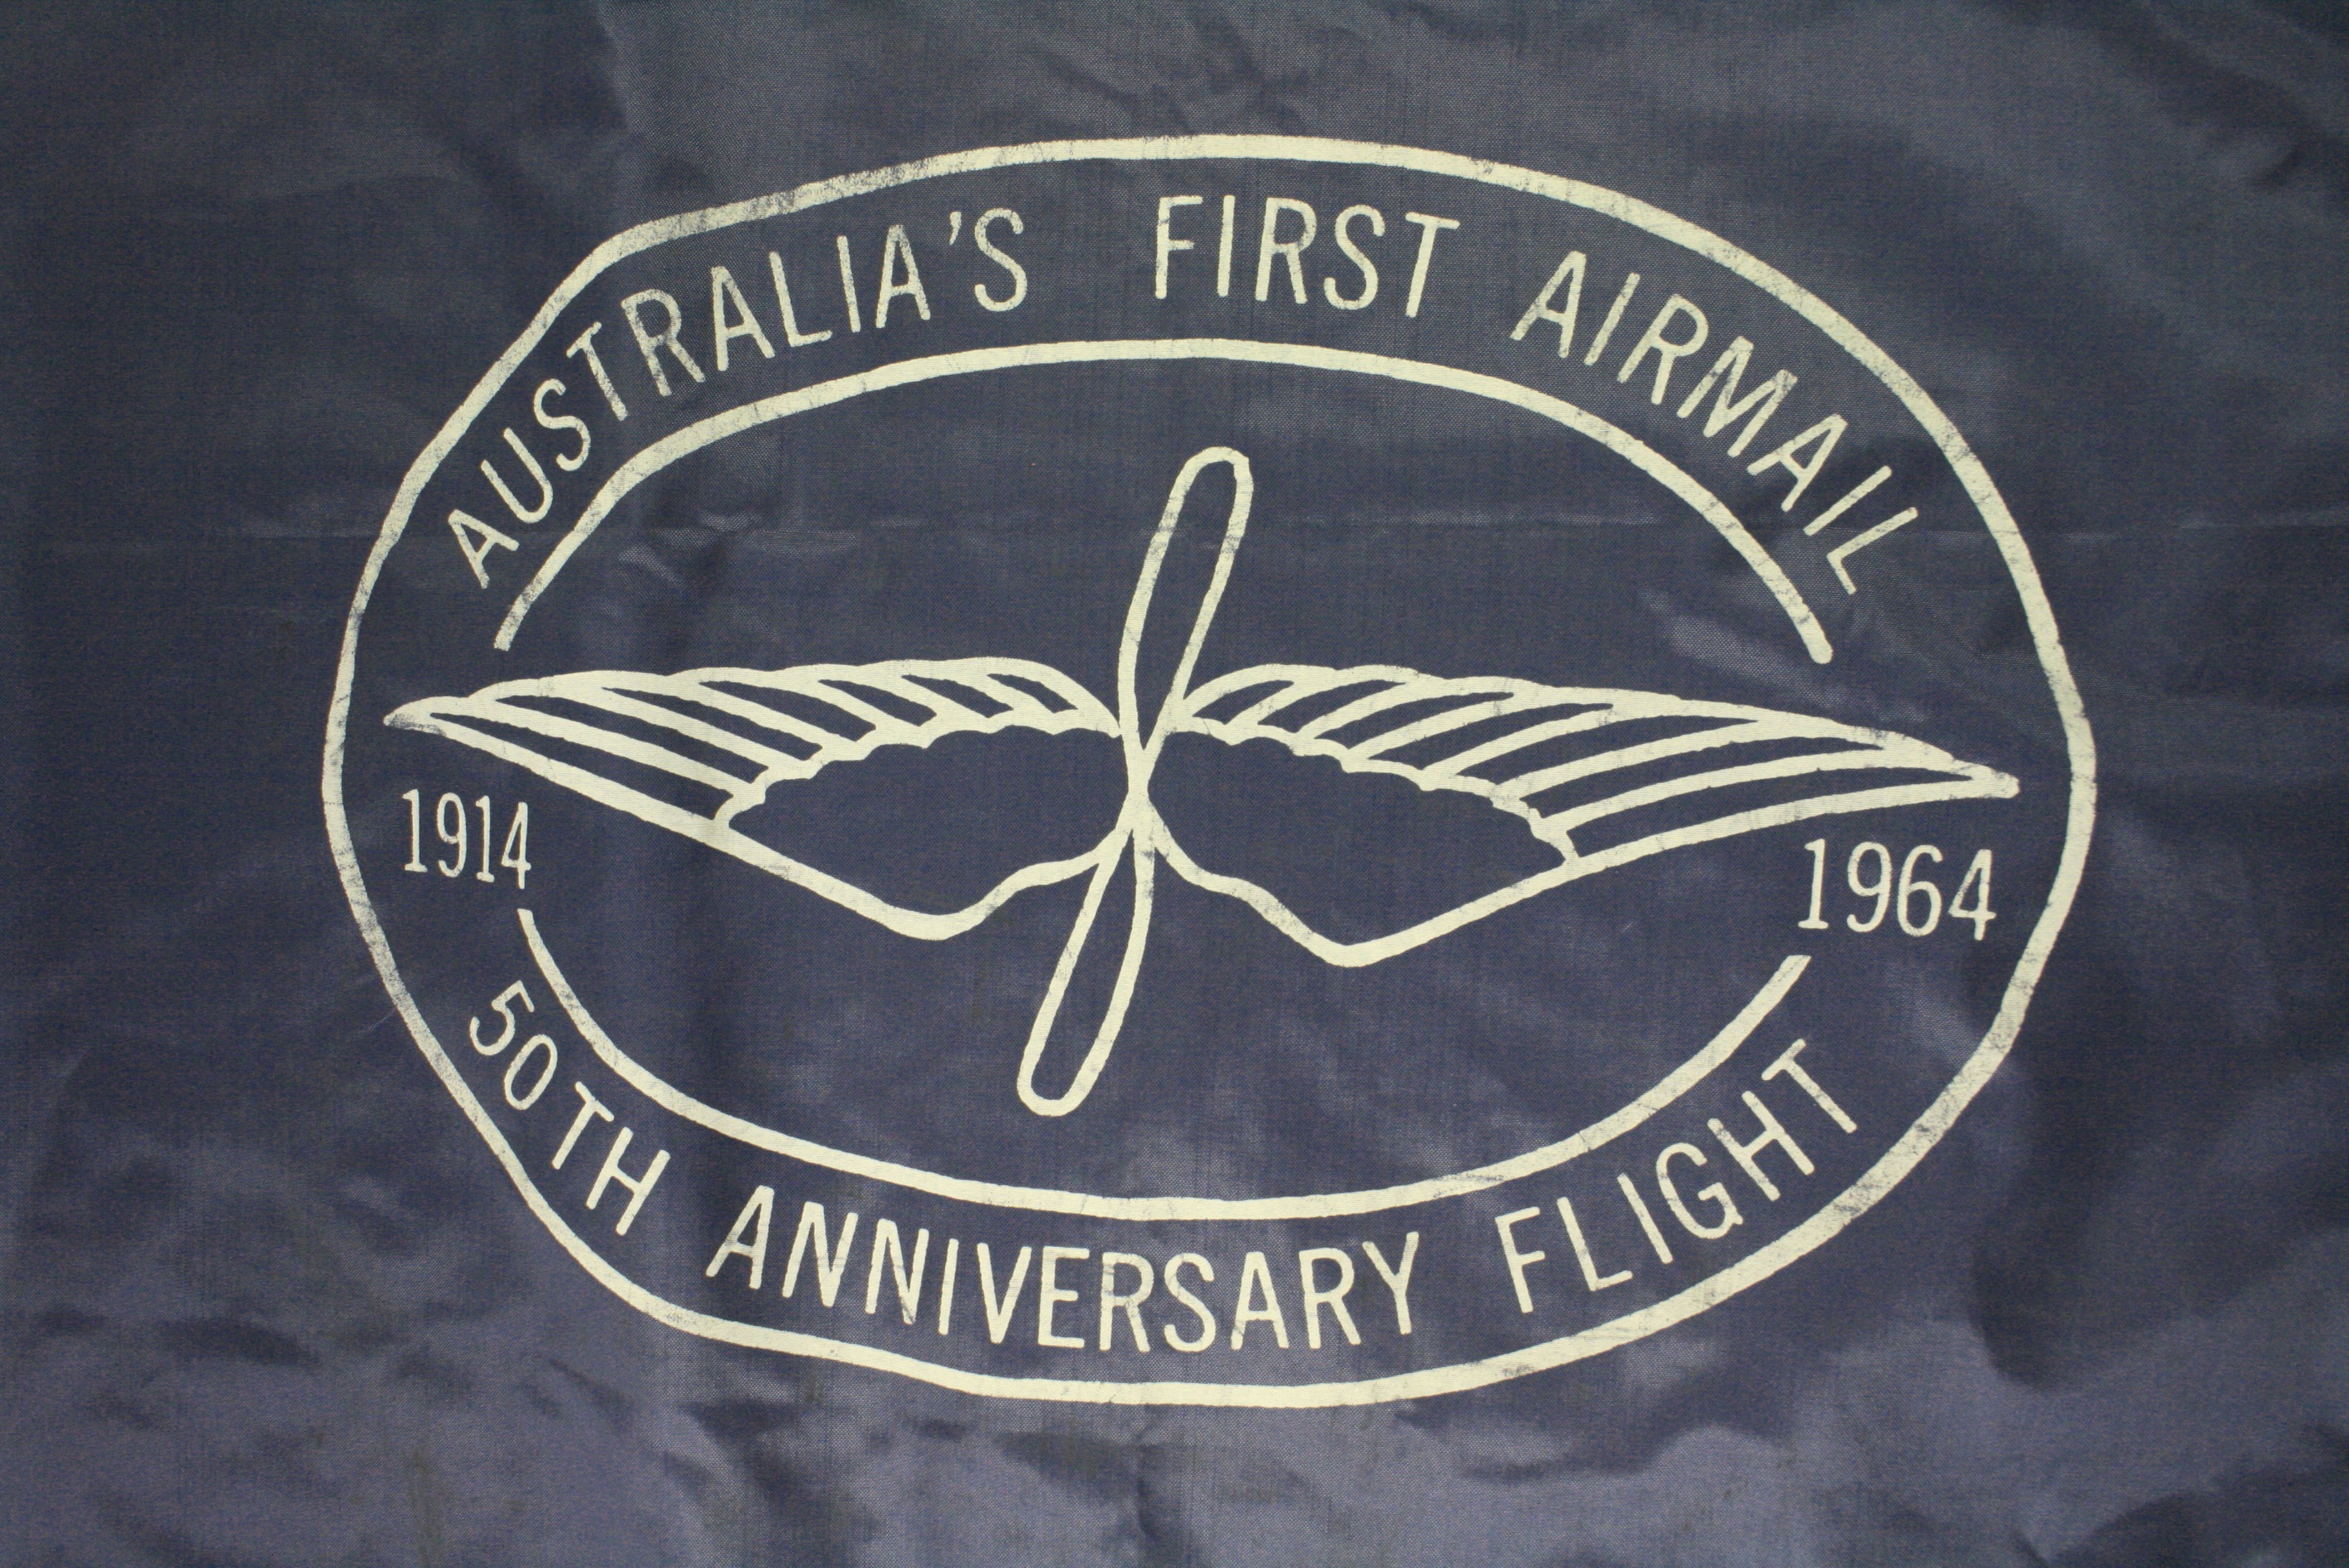 Detail of commemorative airmail bag, celebrating the 50th Anniversary of Australia's First Airmail, 1964. Australia Post Historical Collection, National Museum of Australia.